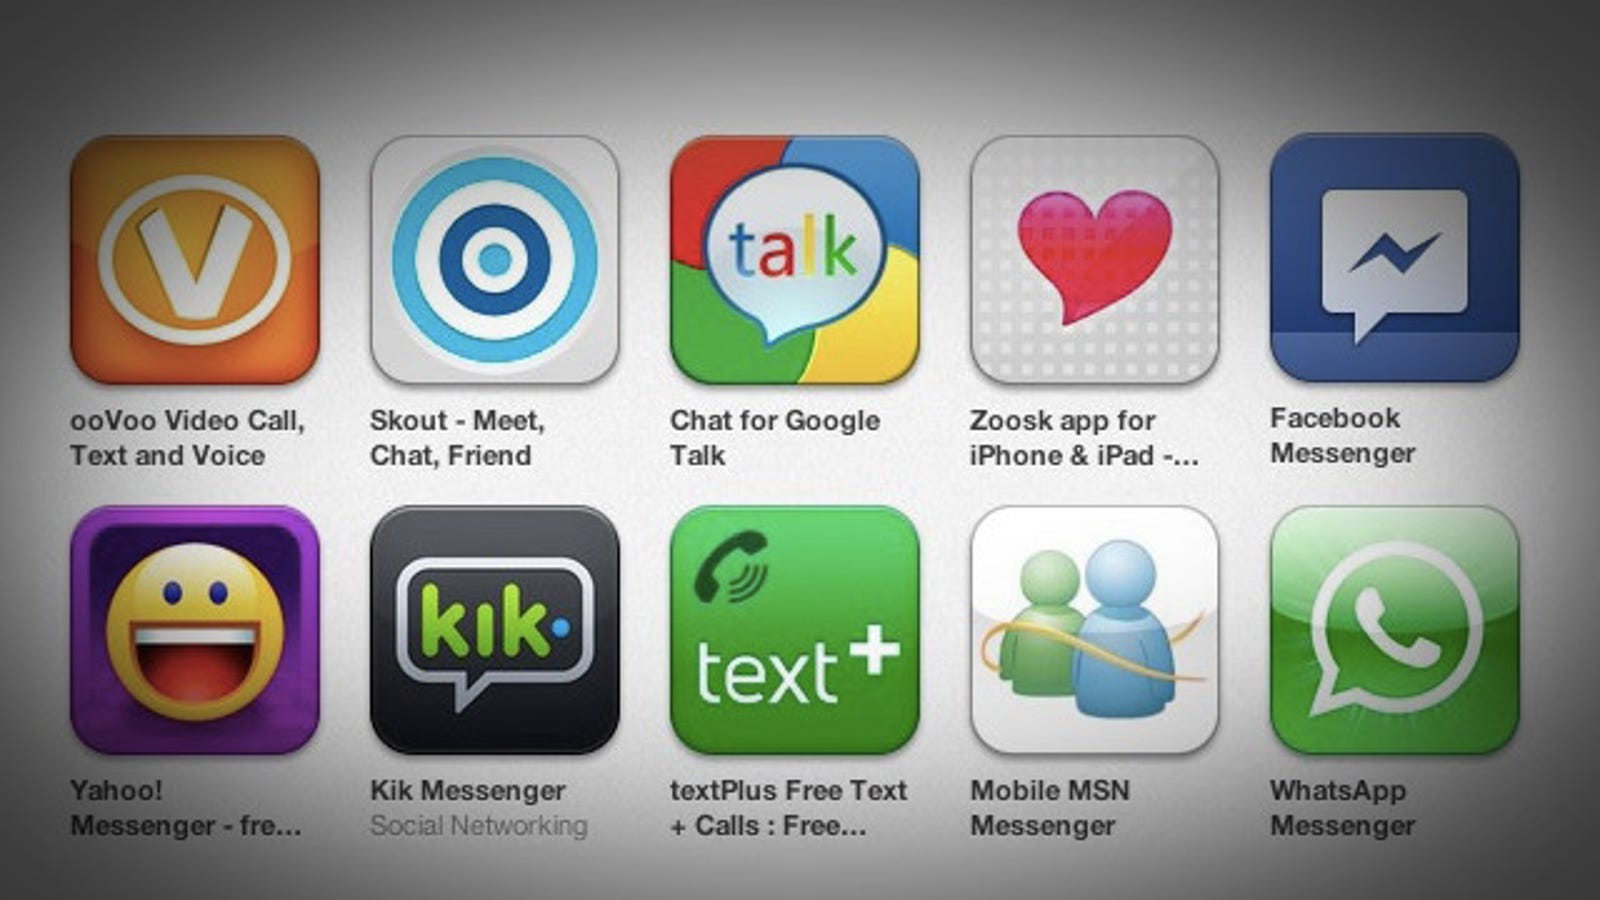 How to chat on zoosk mobile.